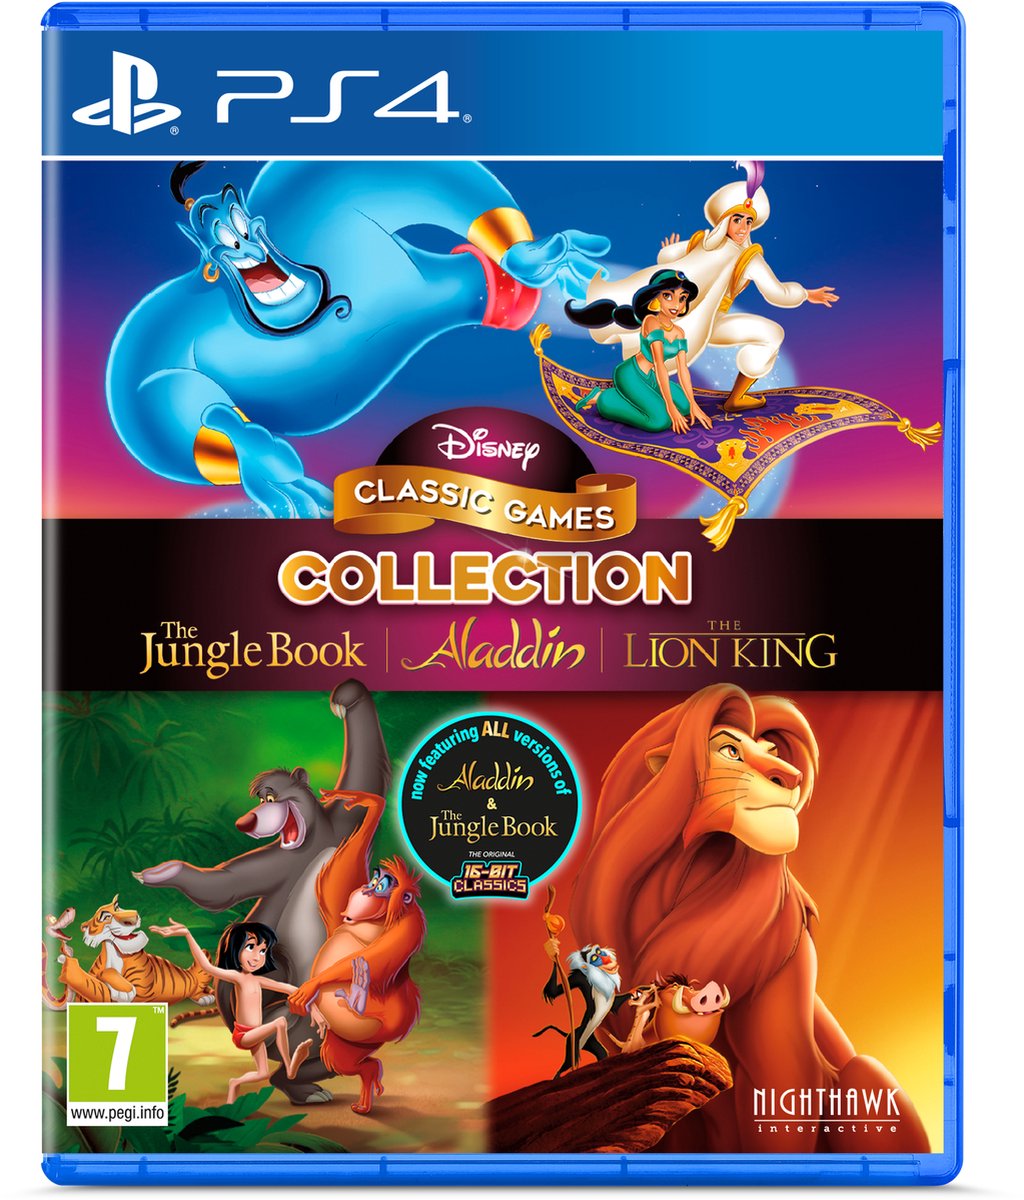 Nighthawk Disney Classic Games: The Jungle Book, Aladdin and The Lion King